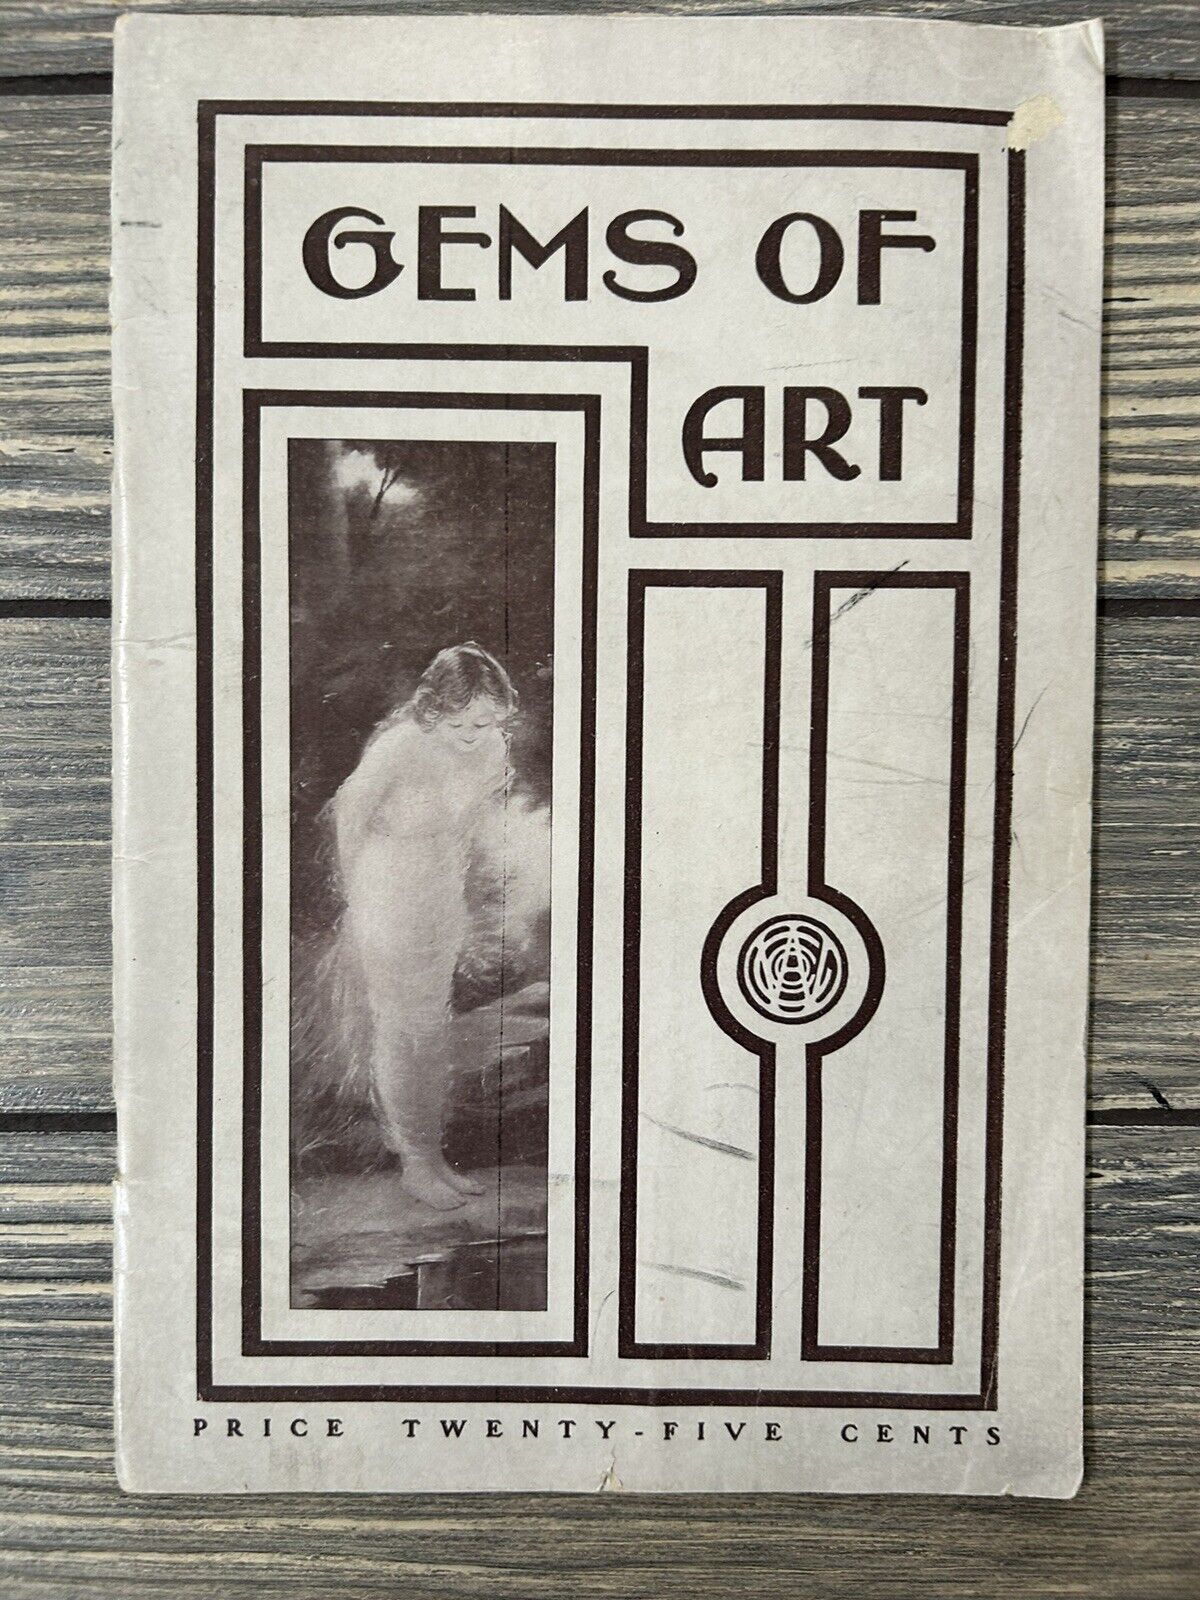 Vintage 1903 Gems of Art Booklet The White City Art Company 